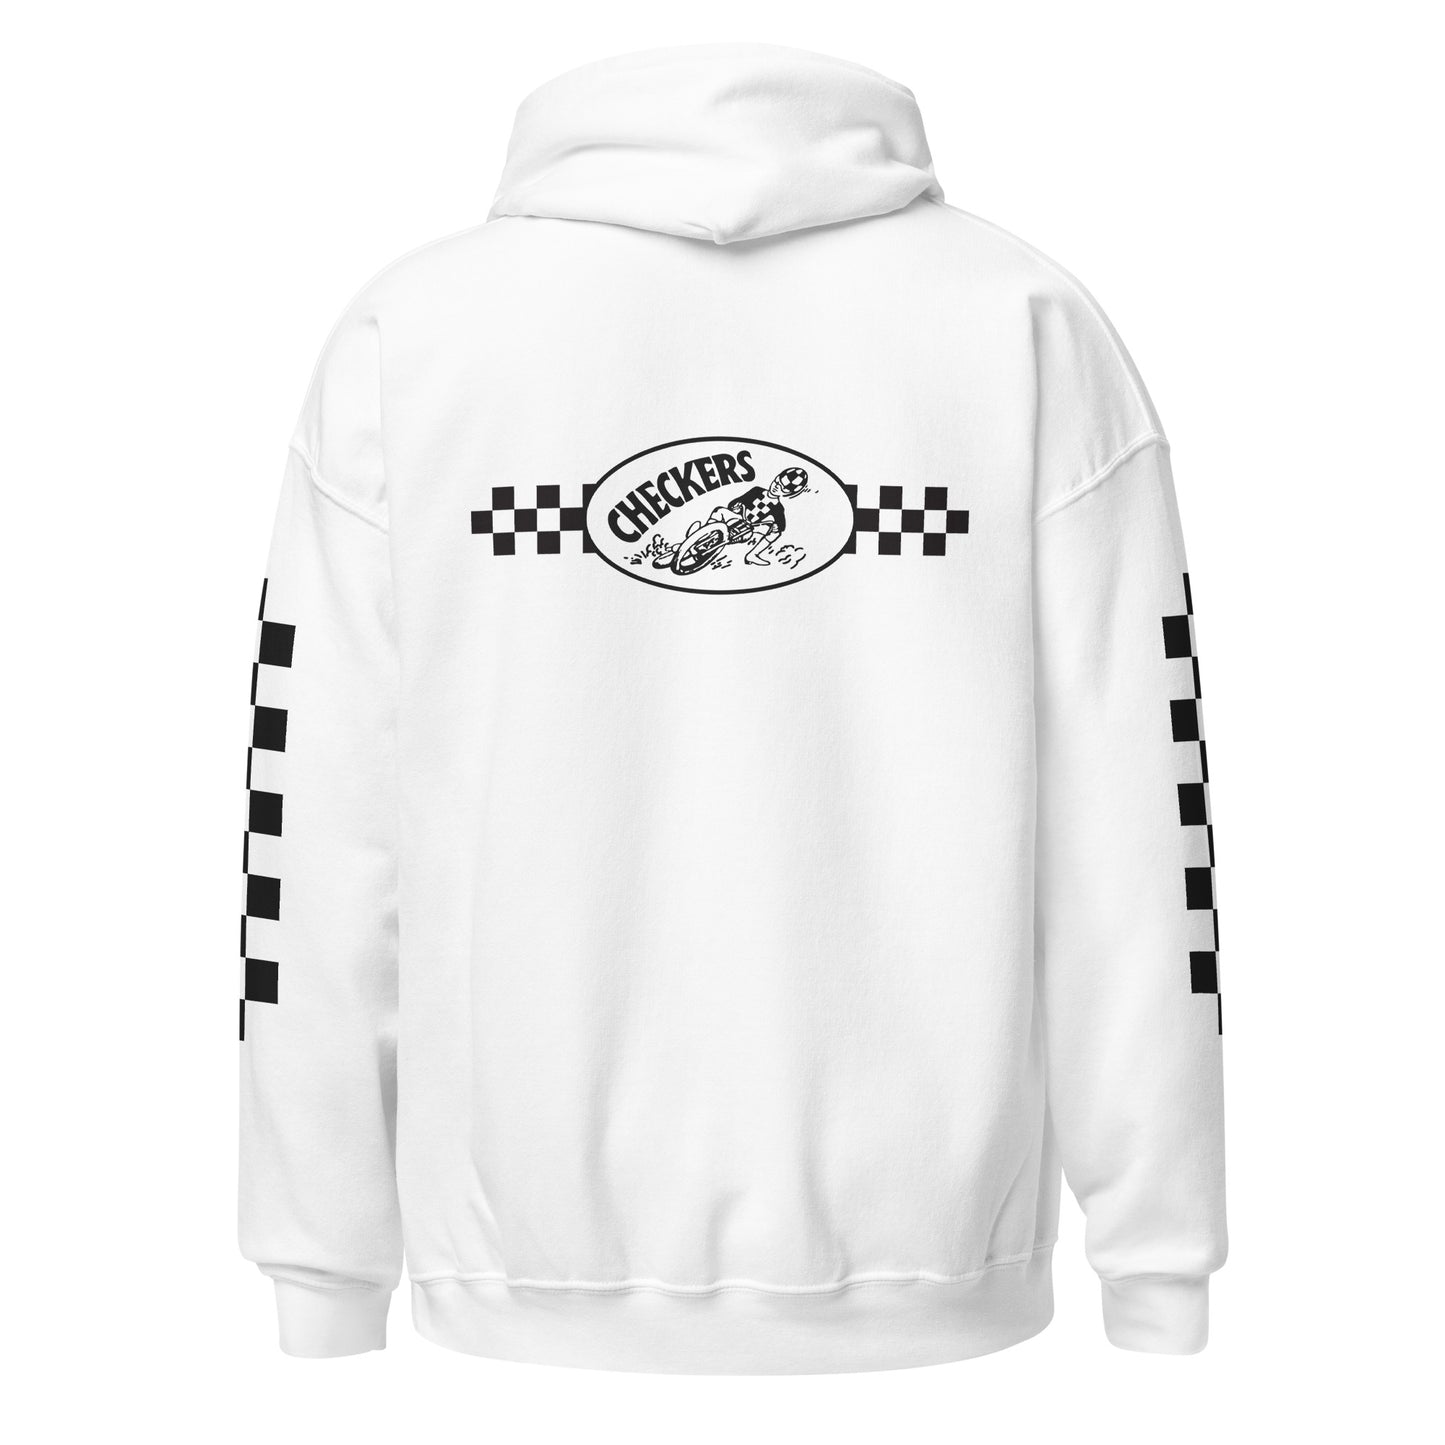 Checkers MC Hoodie w/ Checkered Sleeves - Official Club Apparel